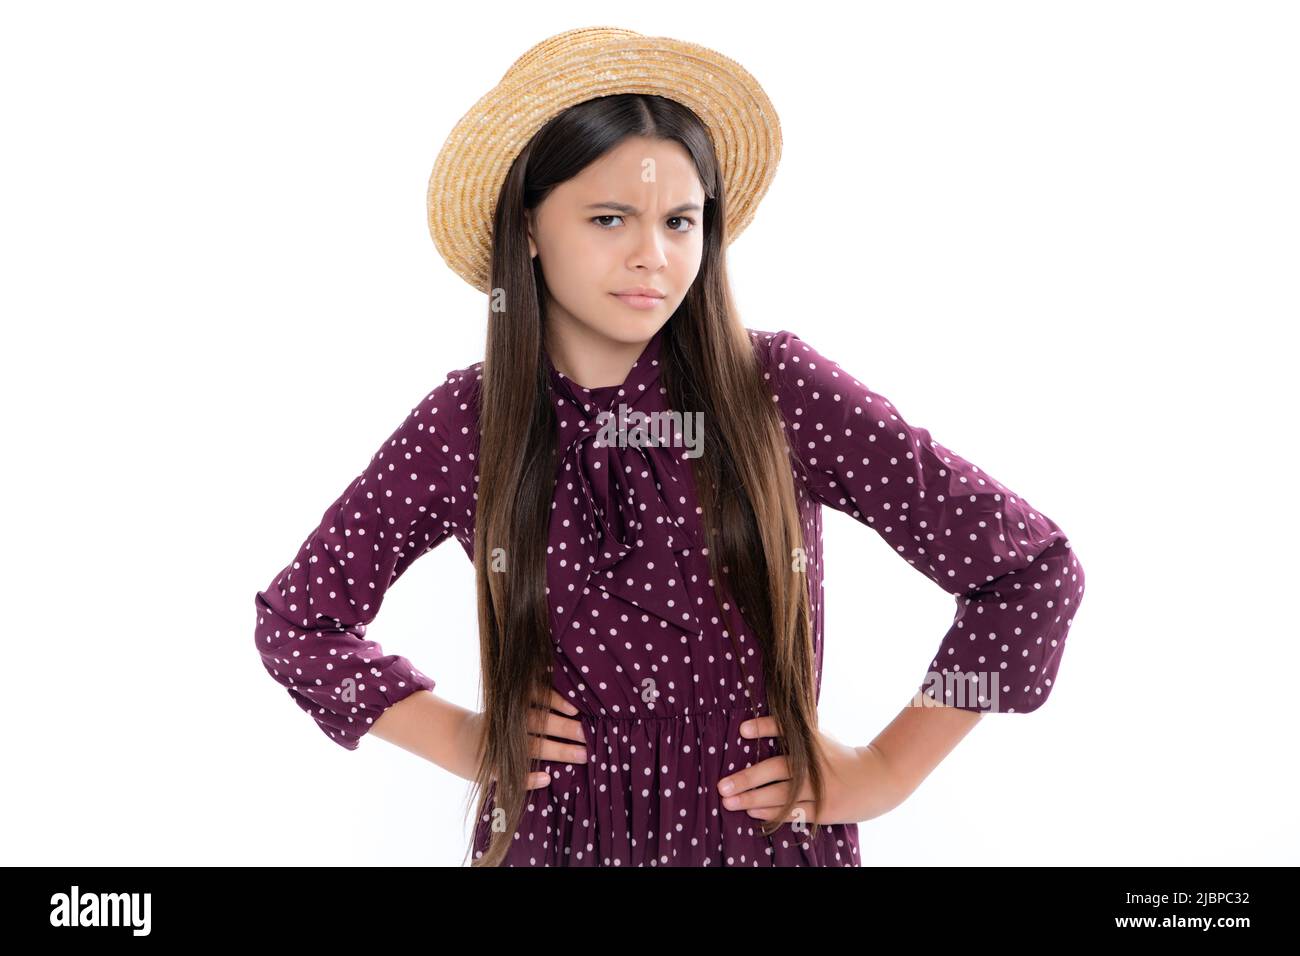 Unhappy upset teenager girl. Closeup portrait mad young child girl. Angry negative human emotion facial expression feeling attitude. Stock Photo